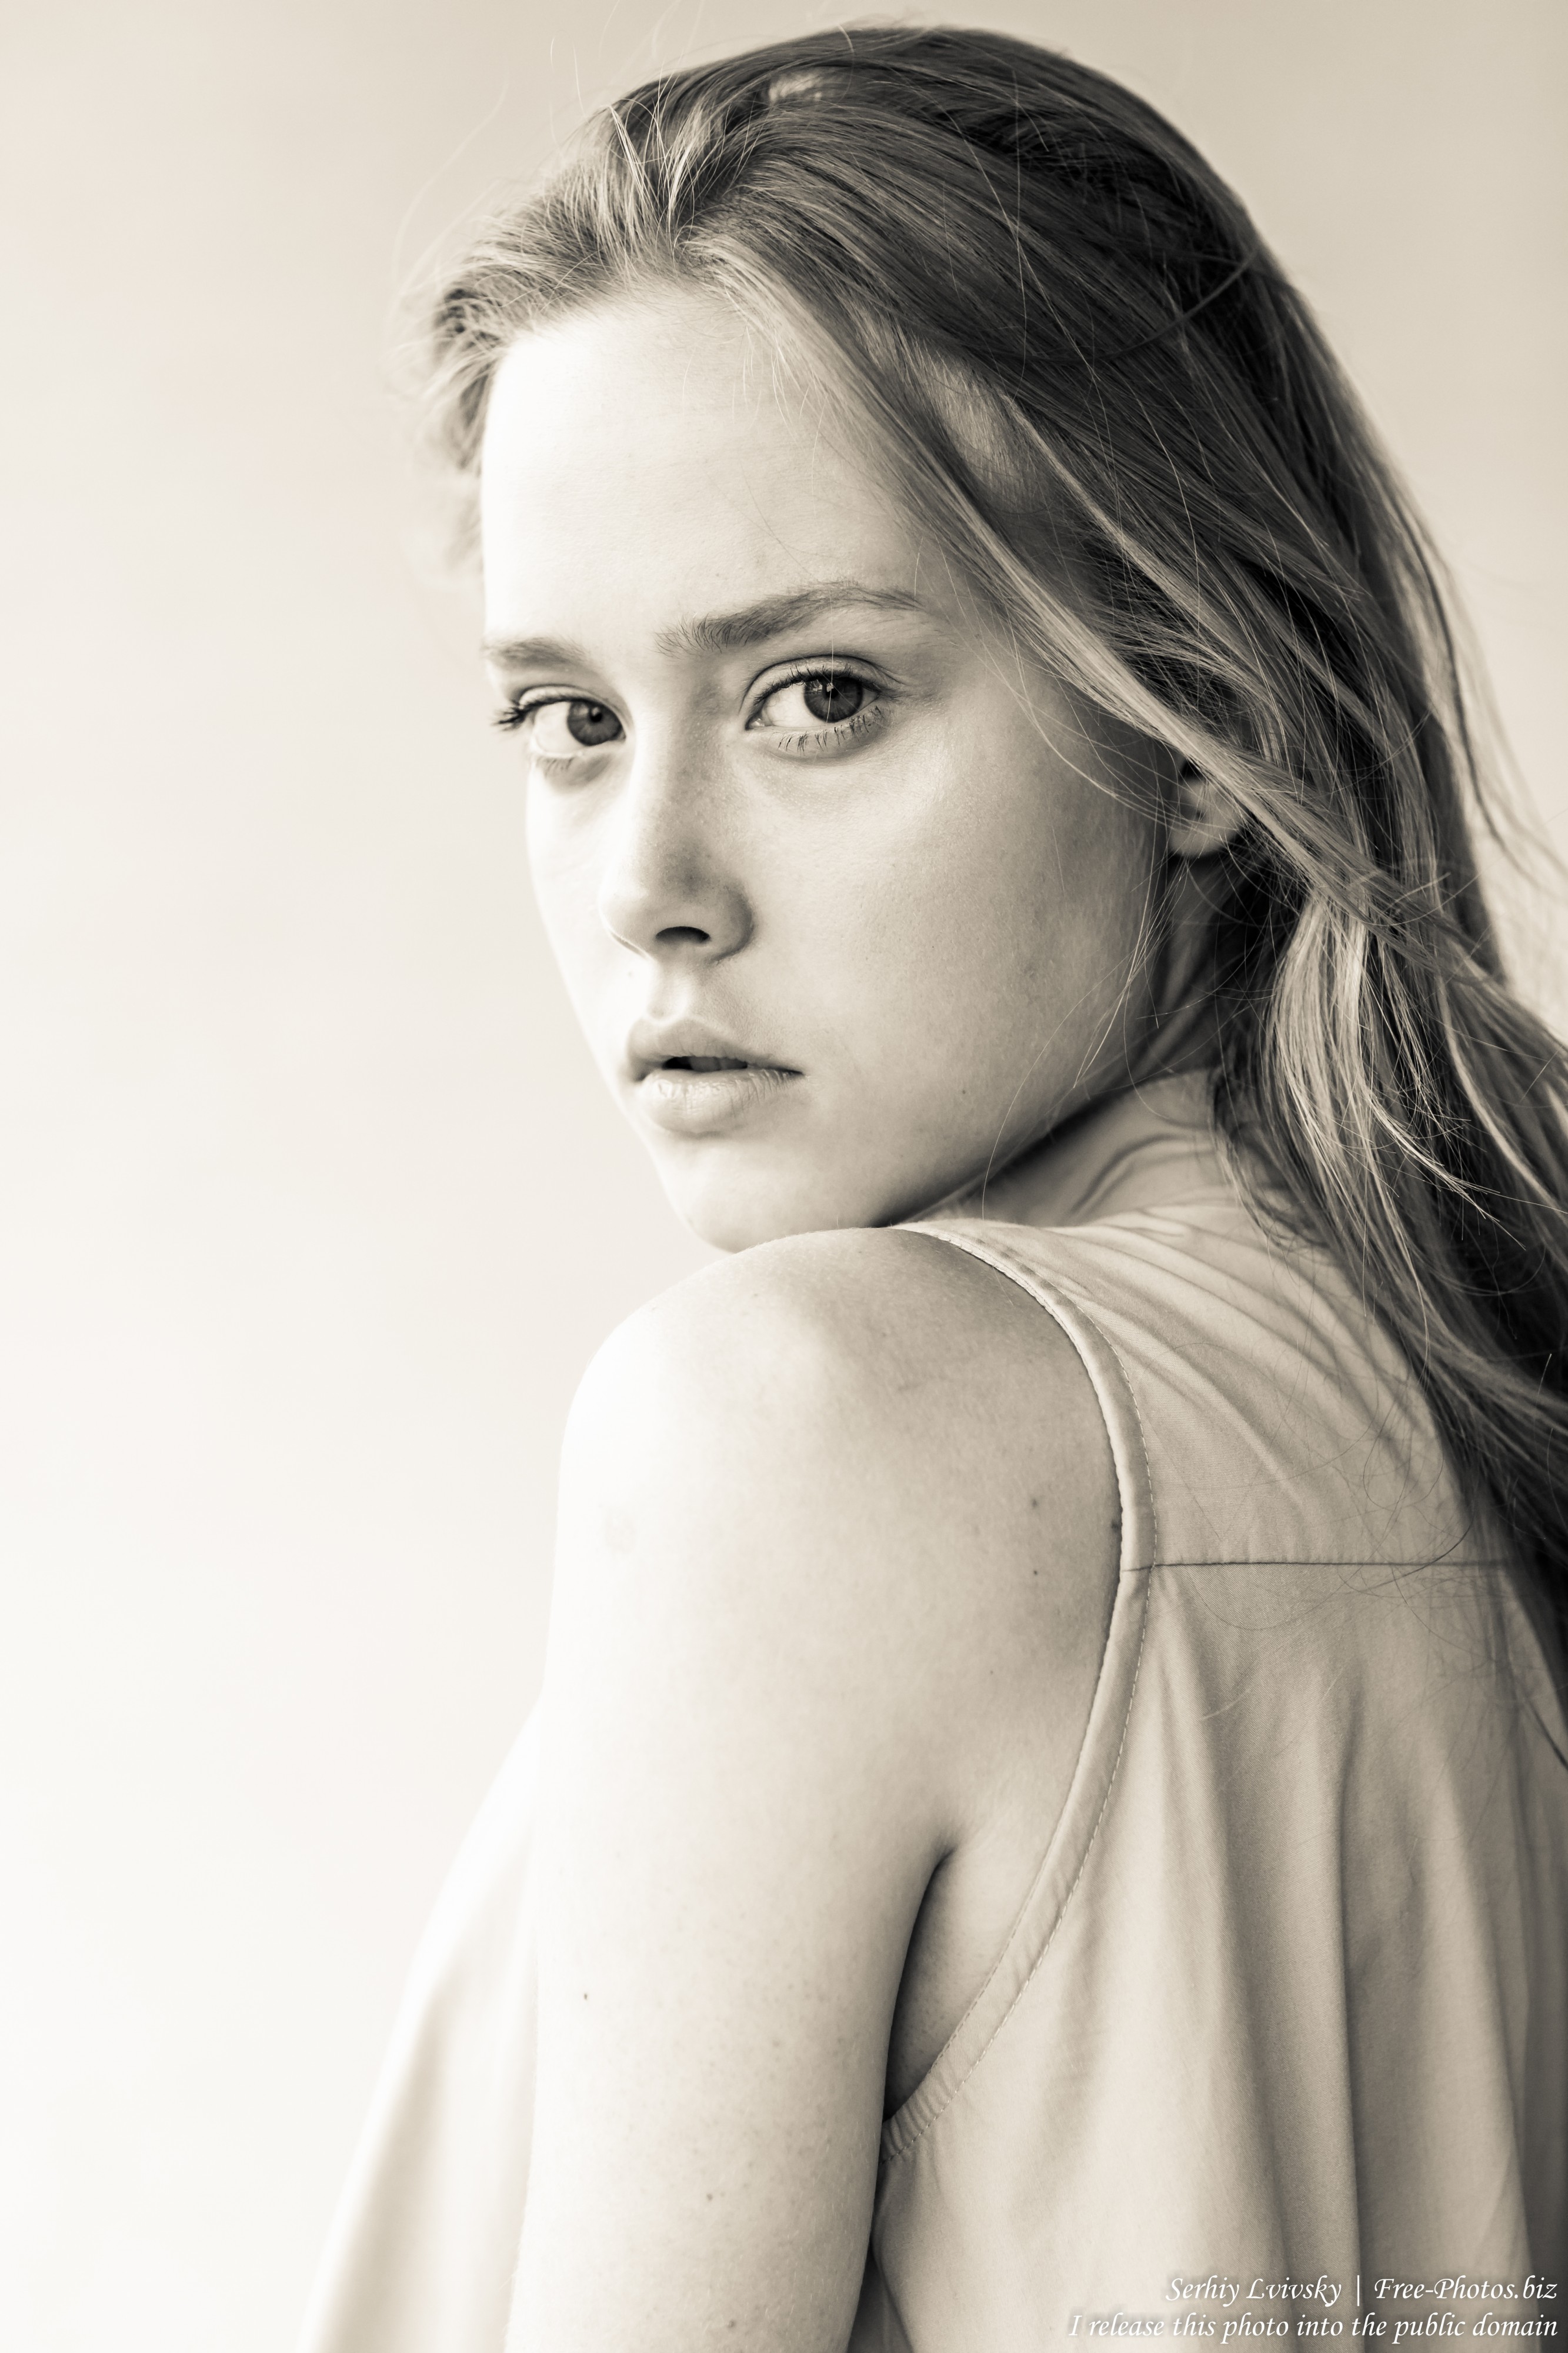 Photo Of Ania An 18 Year Old Natural Blonde Girl Photographed In June 2019 By Serhiy Lvivsky